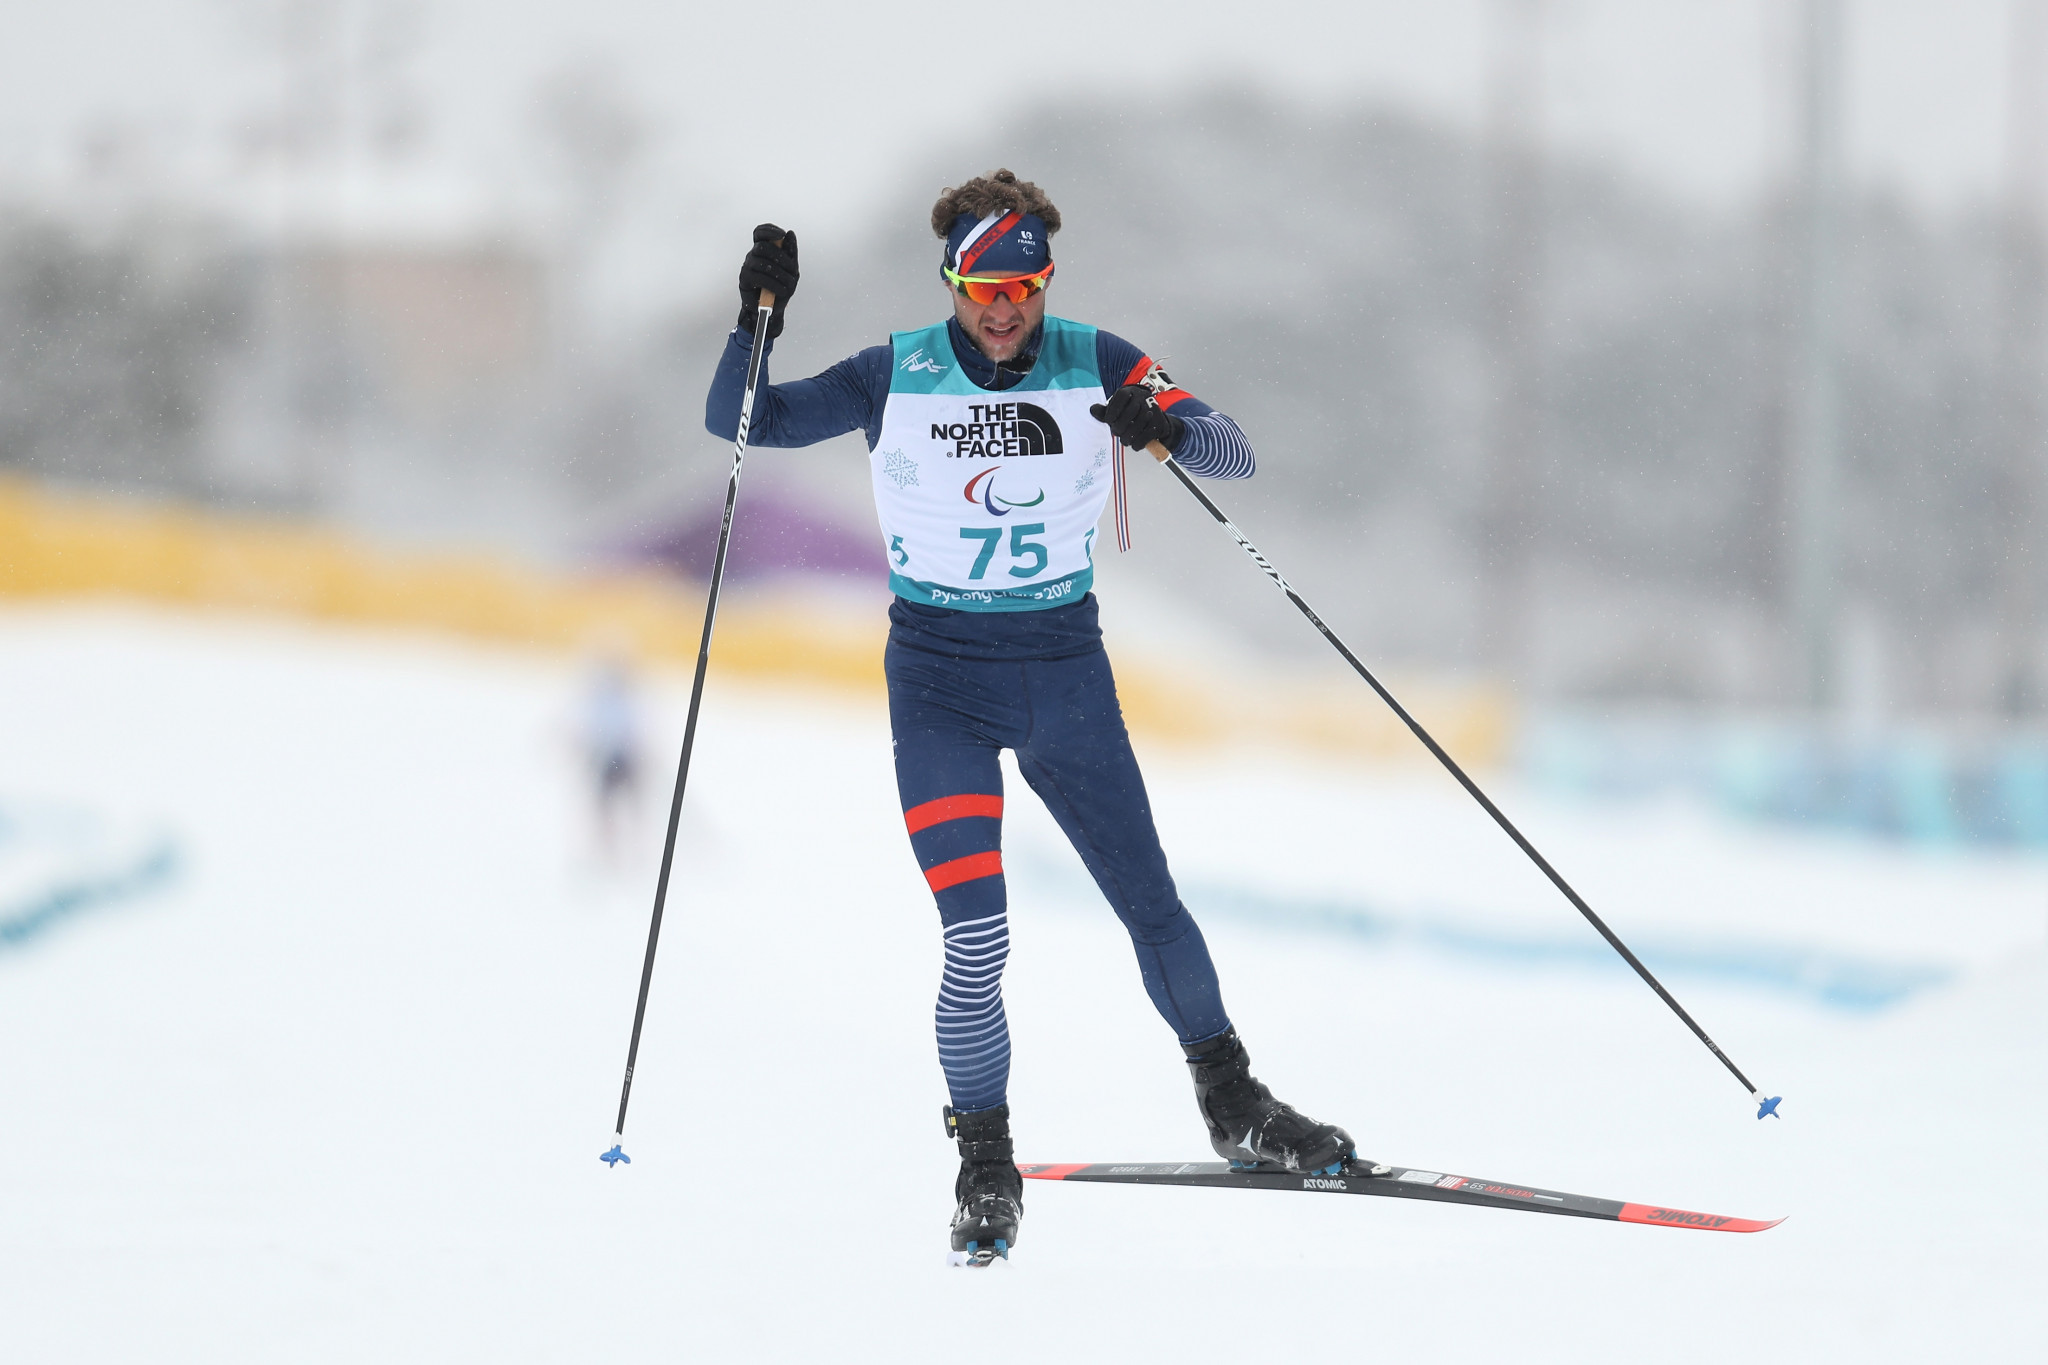 French Nordic skier Benjamin Daviet was second in the polls ©Getty Images